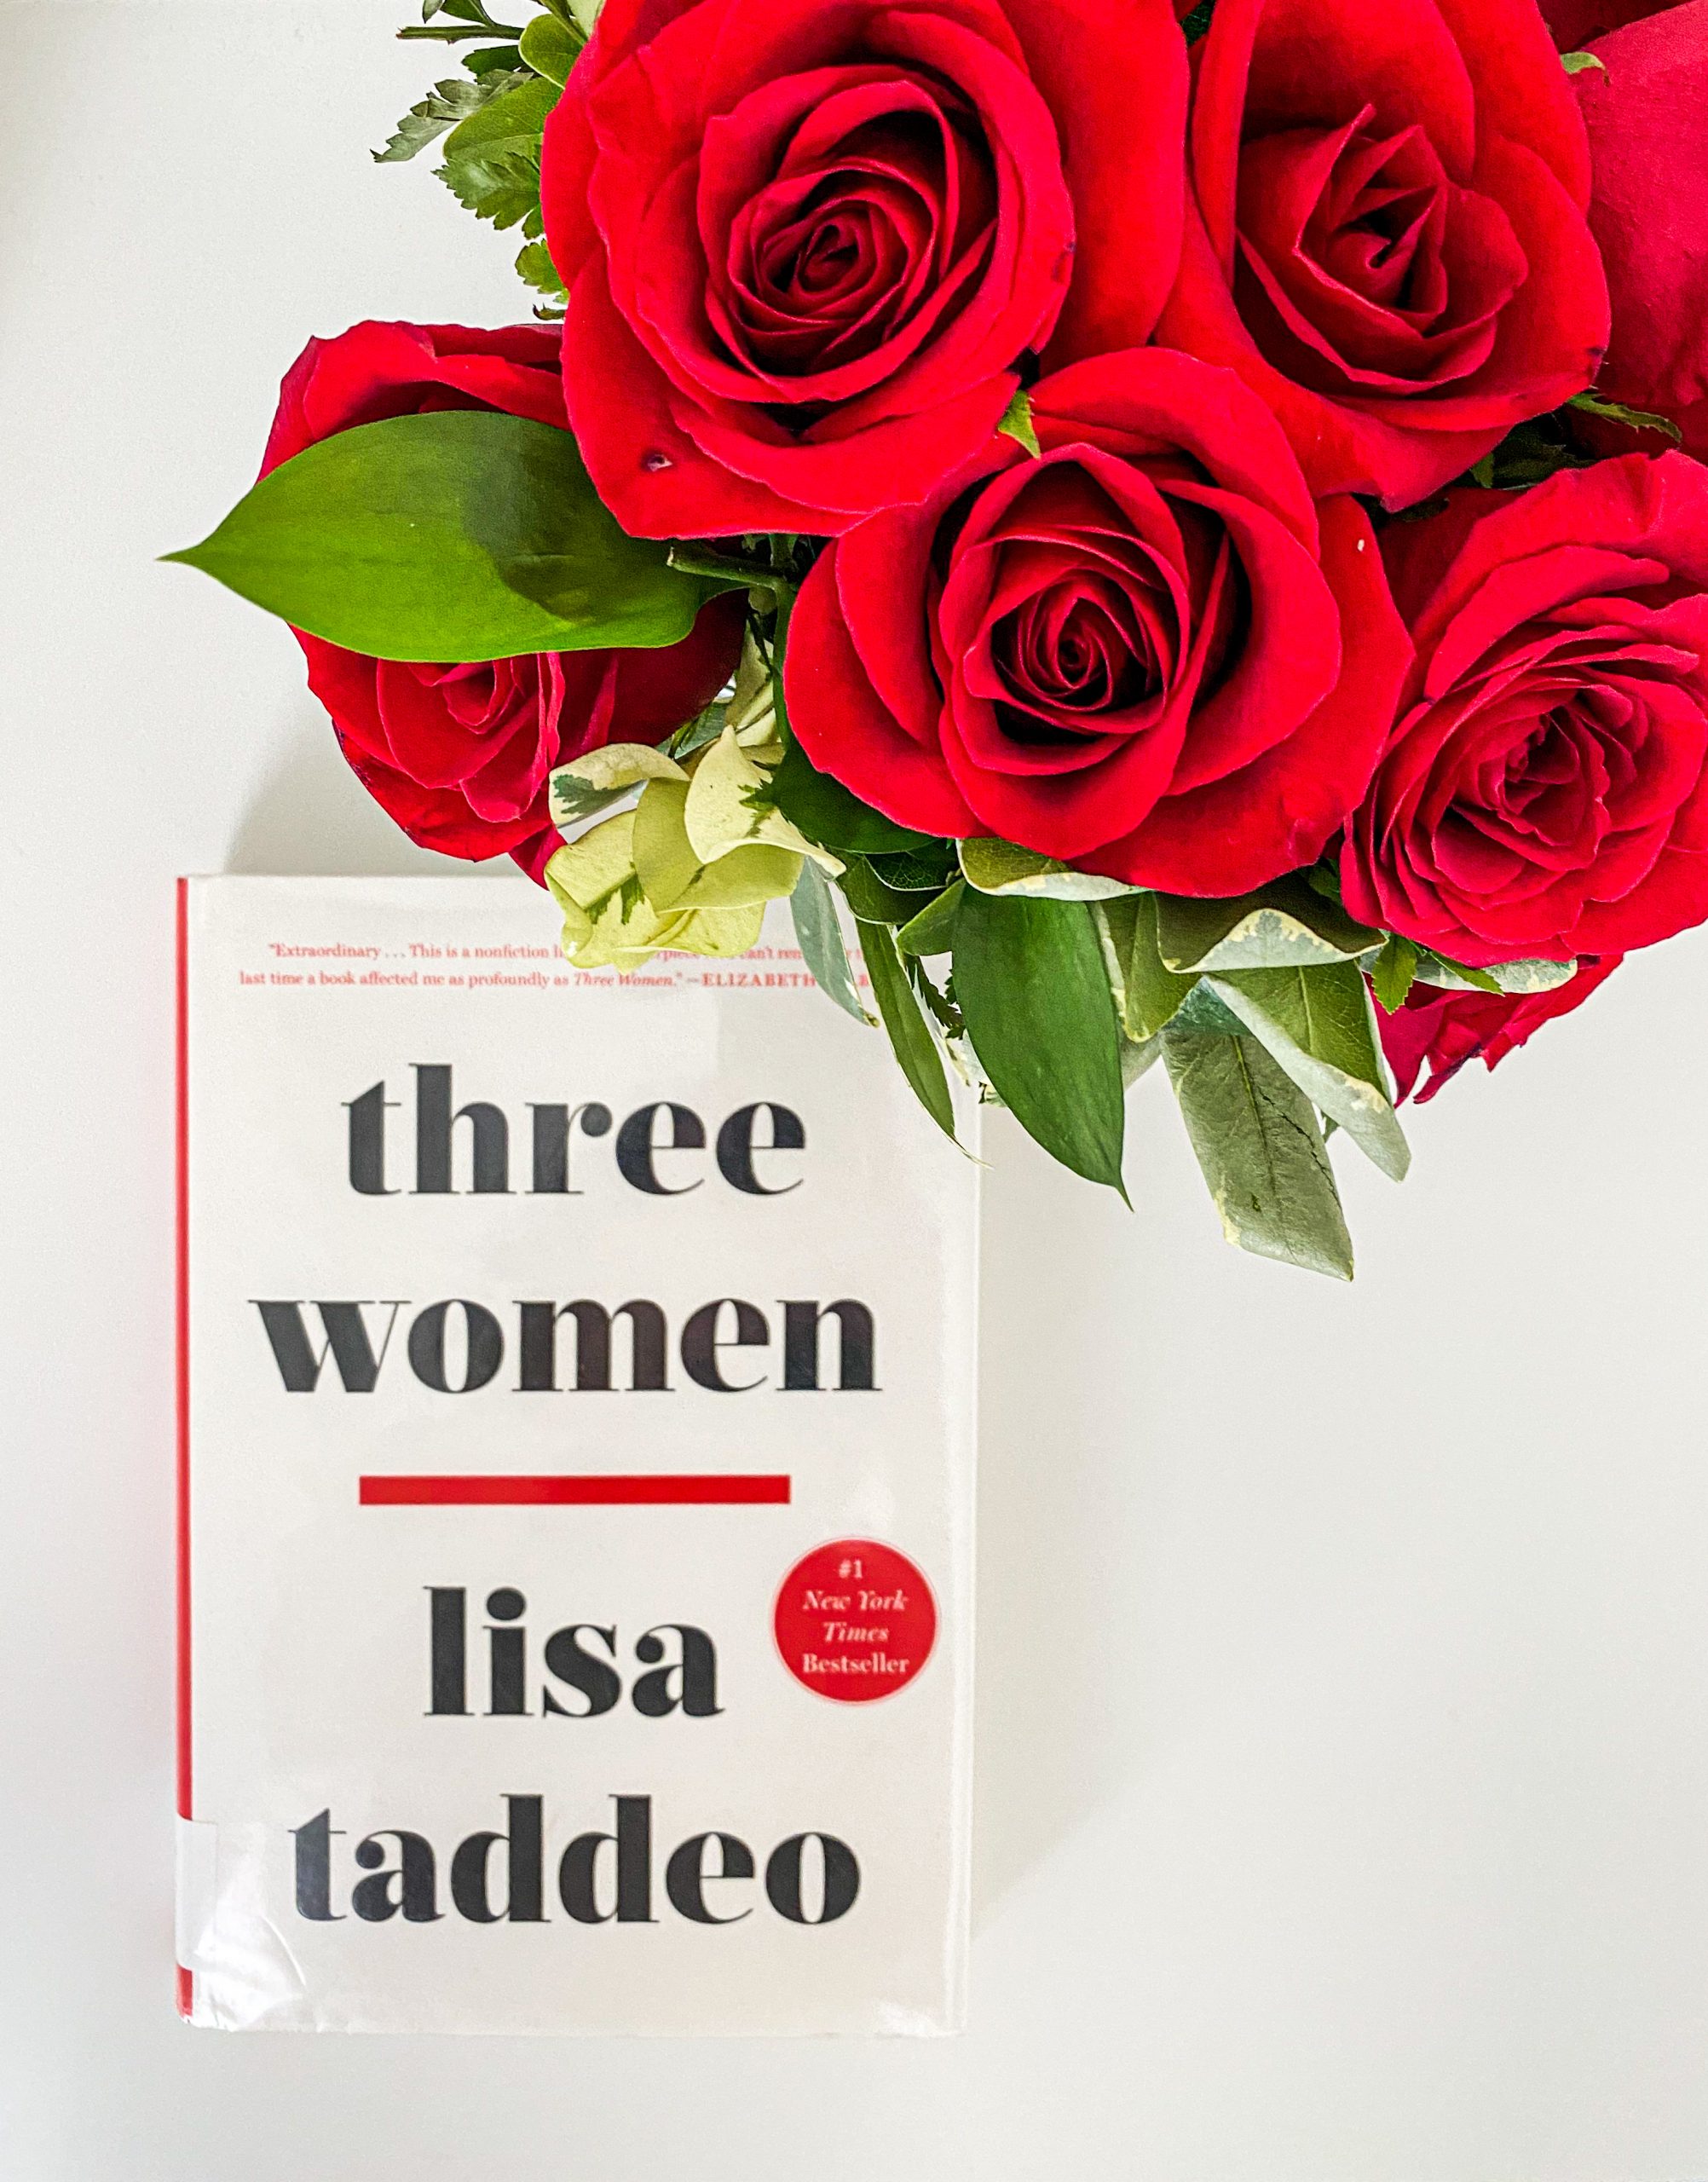 A white book titled Three Women by Lisa Taddeo pictured with a bouquet of red roses